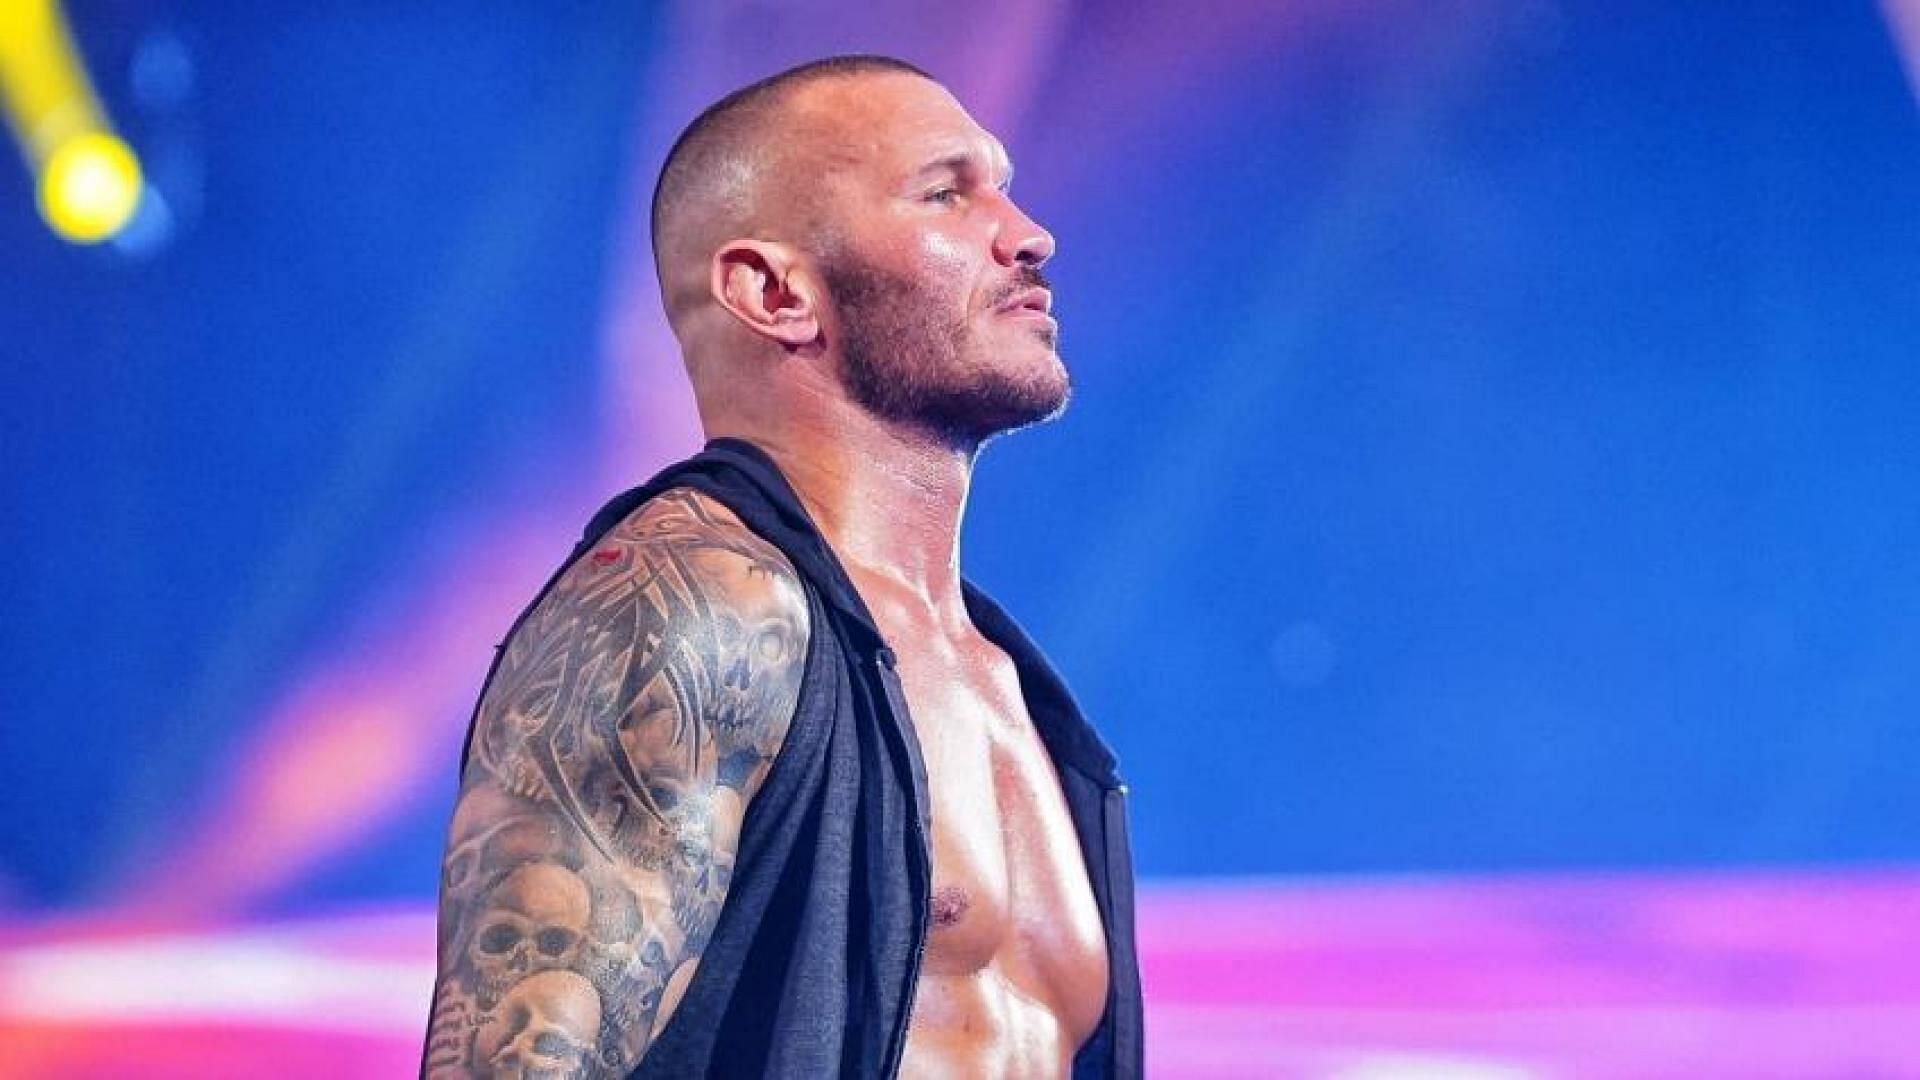 How much wear and tear has performing the RKO put on Randy Orton?